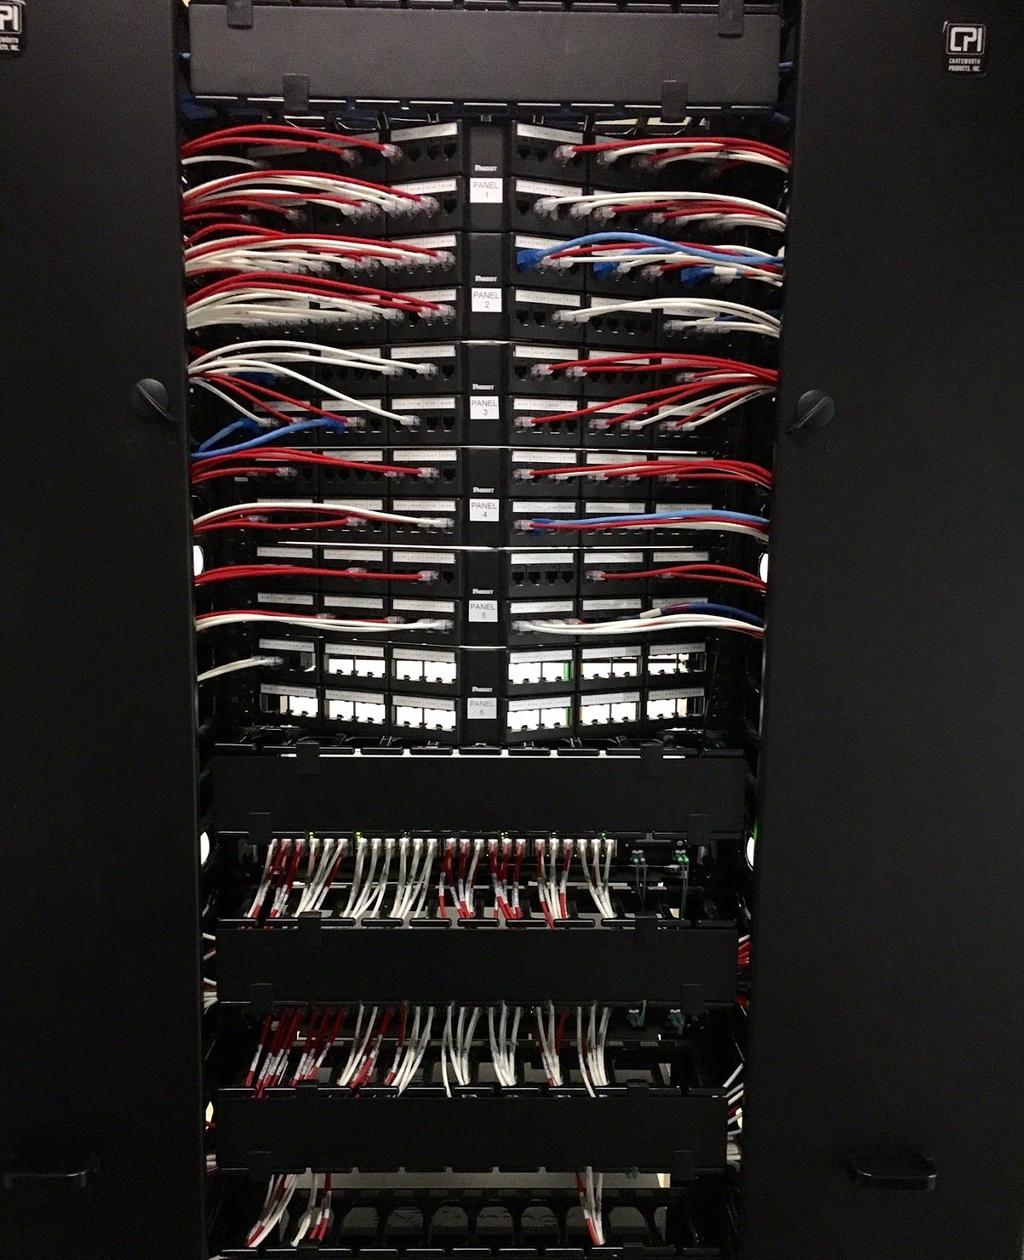 12.3. 2Post Rack Layout 12.3.1. 12.3.2. From top of rack: 1U space 2U horizontal wire manager 6 48port panduit patch panels 2U